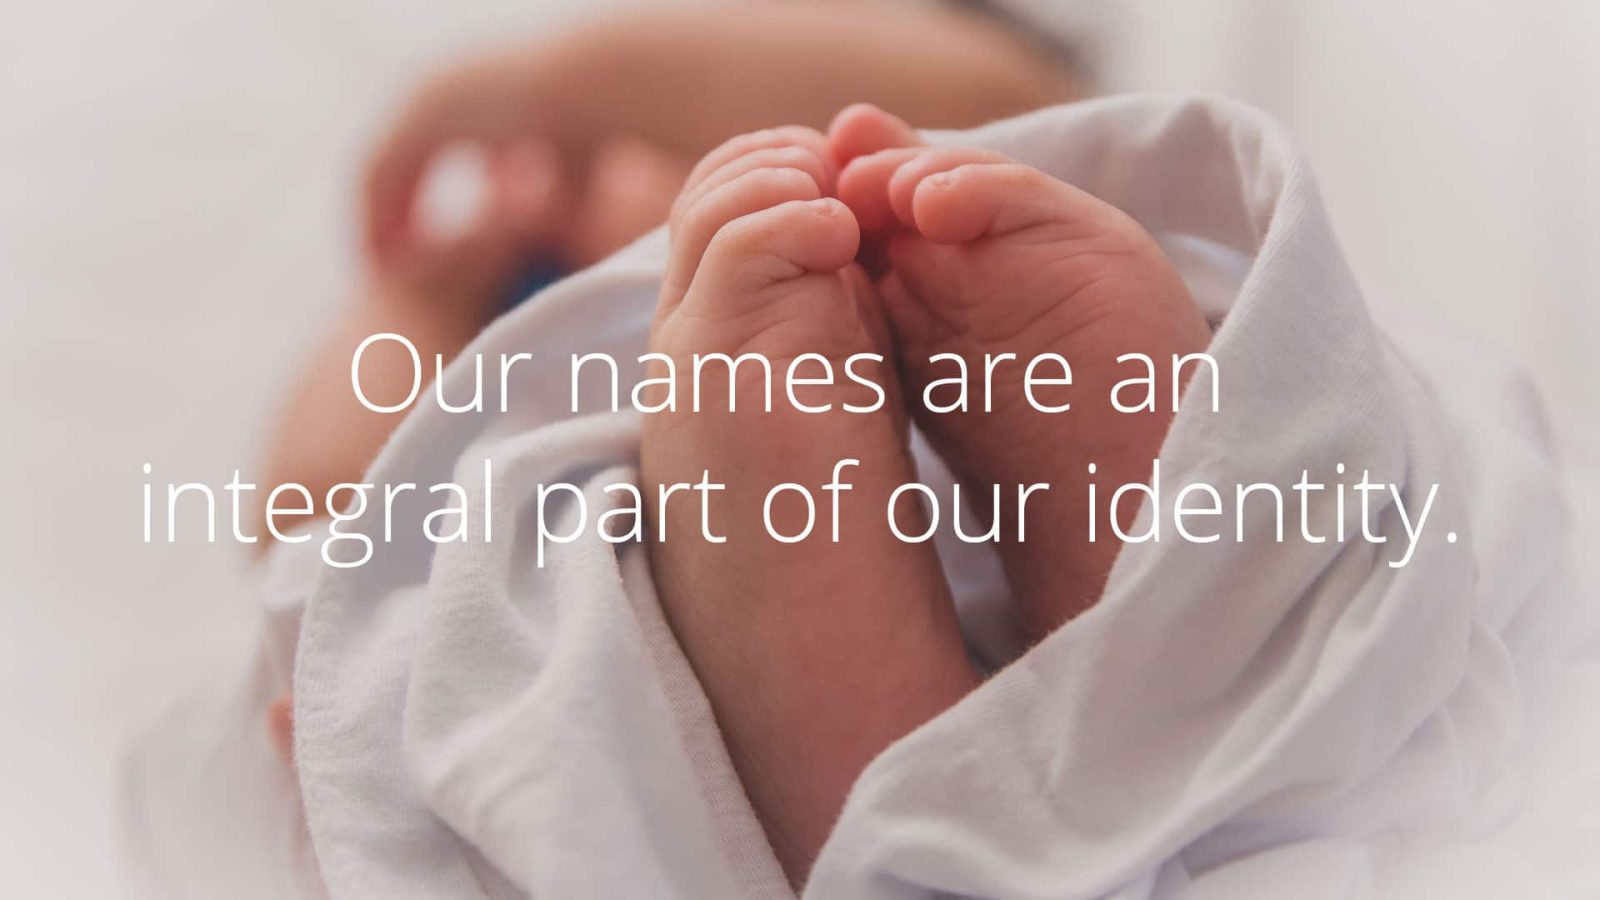 Our names are an integral part of our identity.